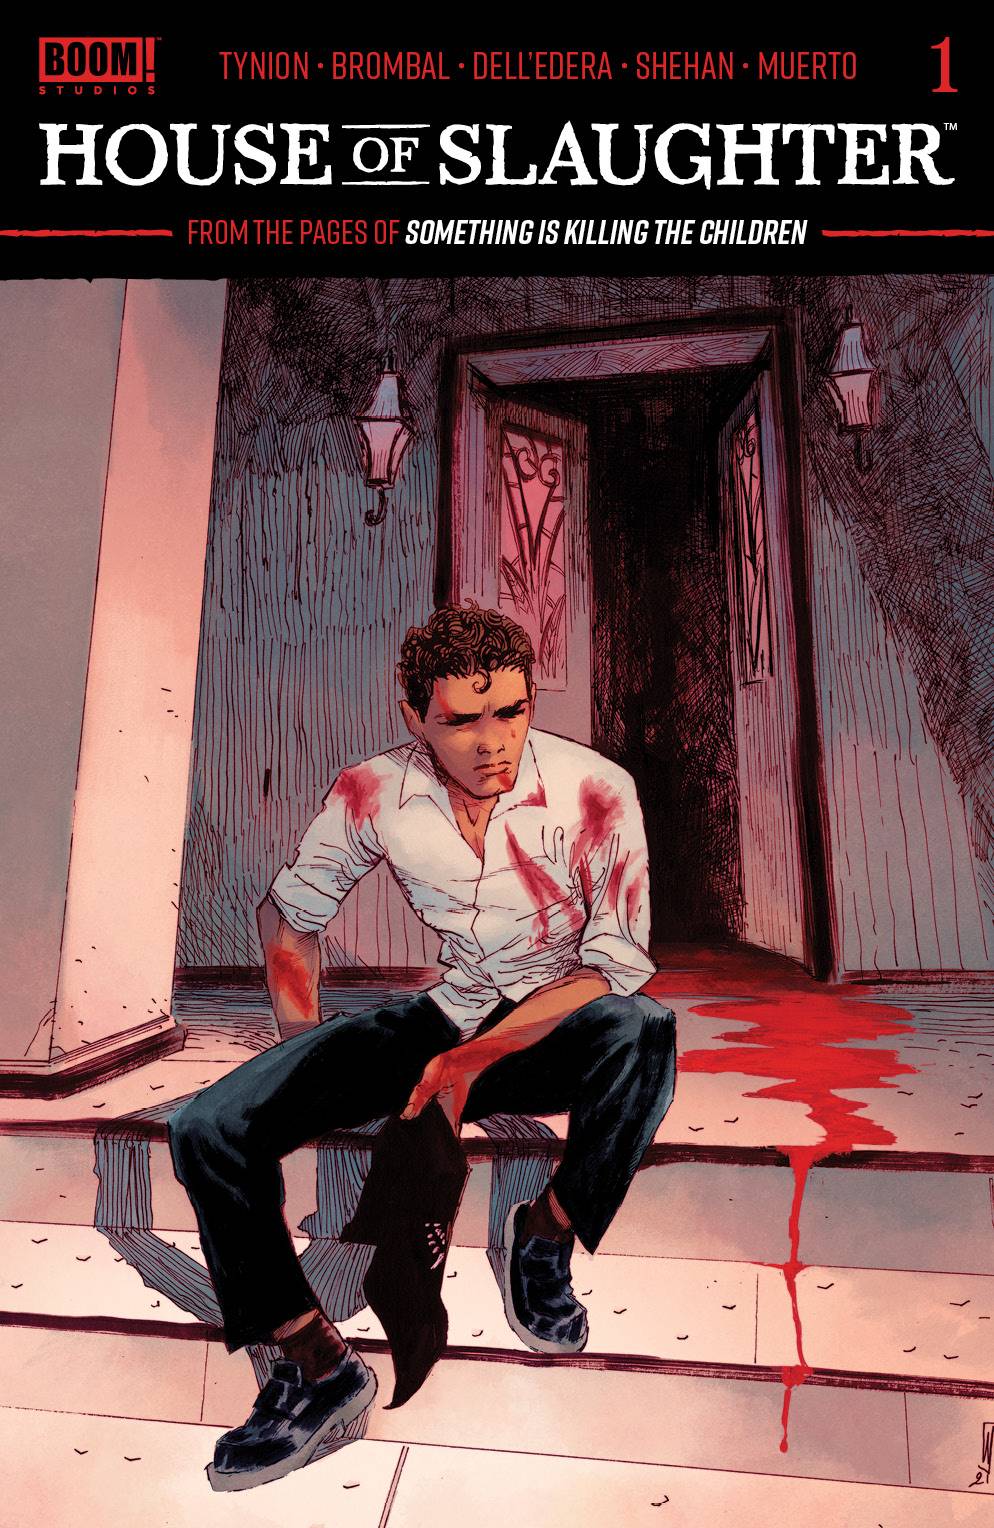 House of Slaughter #1 B Werther Dell'Edera Variant Something Is Killing The Children (10/27/2021) Boom